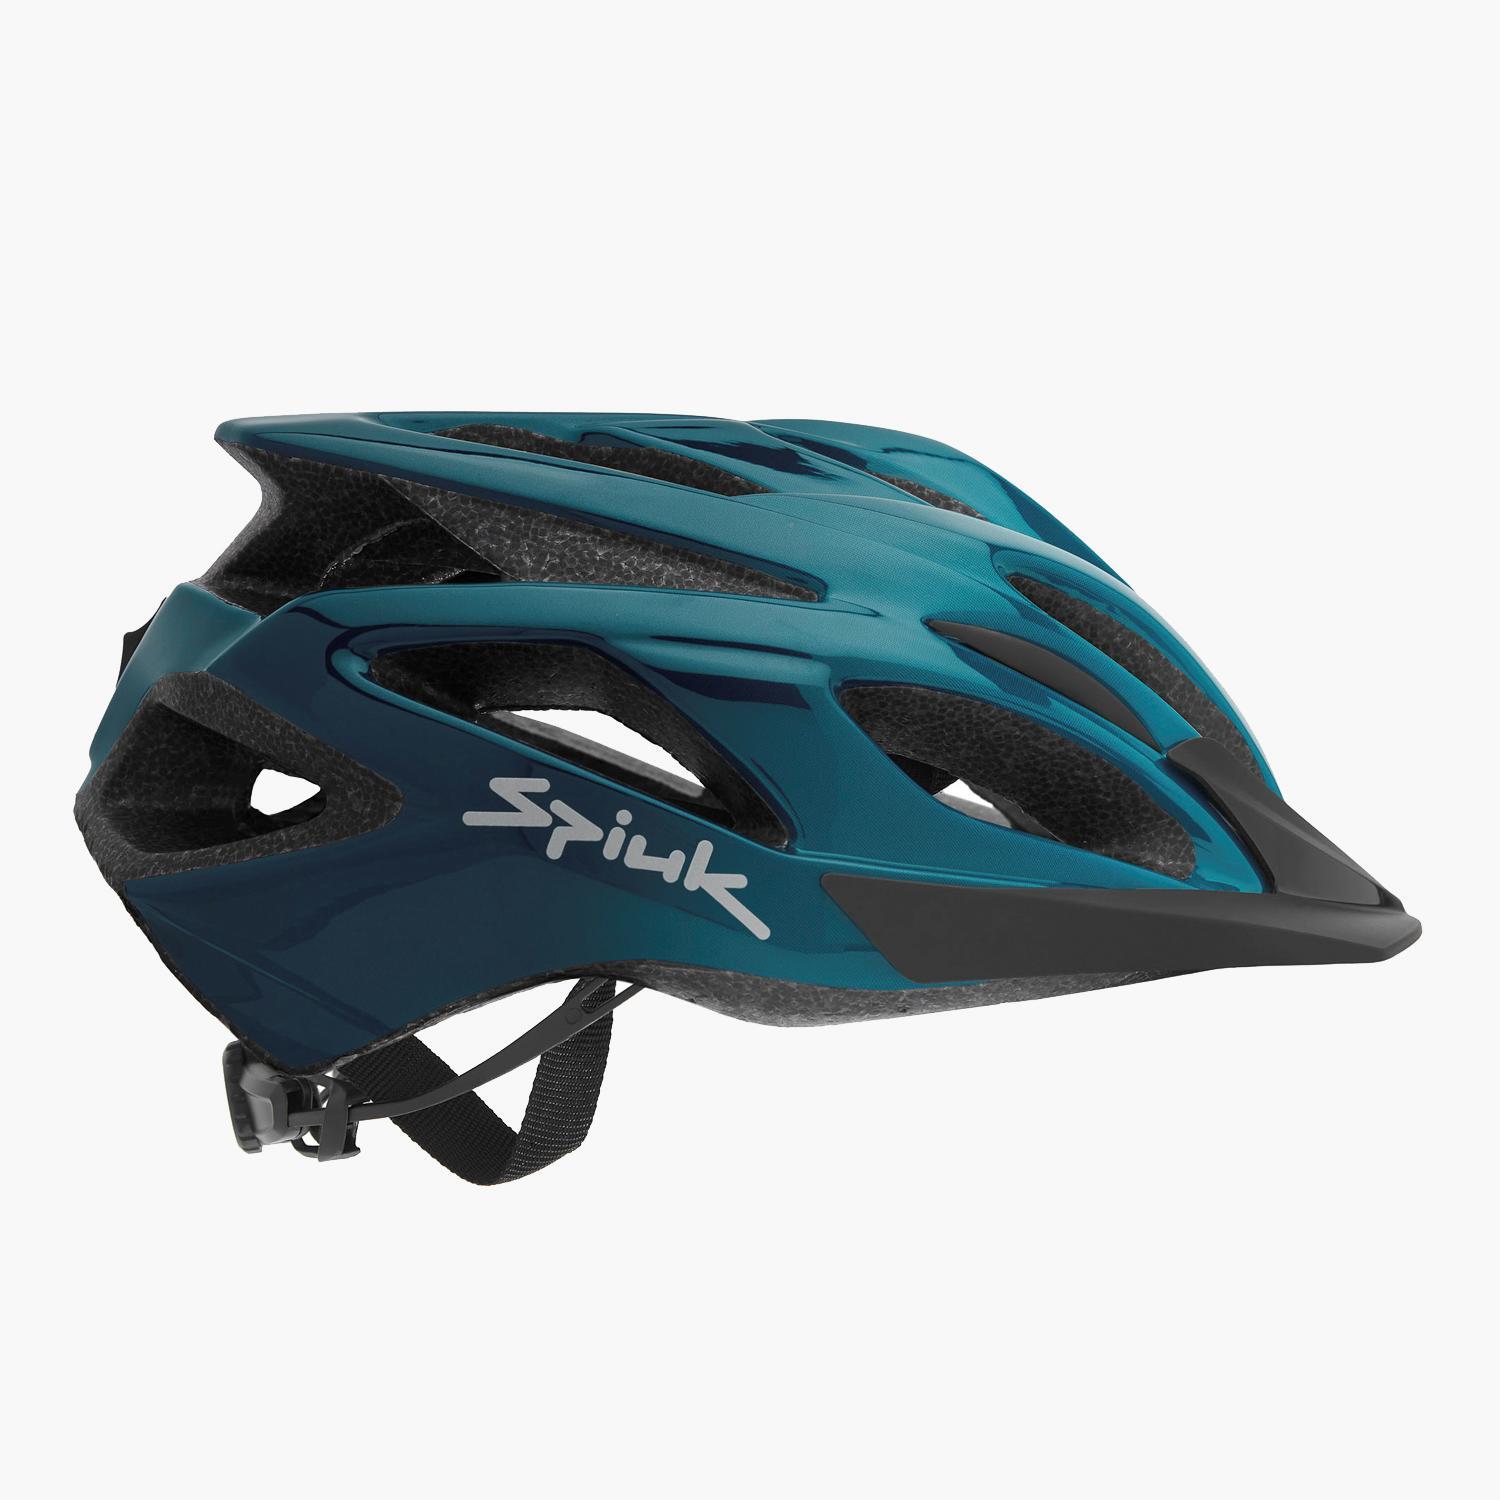 Spiuk Tamera Evo - Turquoise - Casque, vélo sports taille L